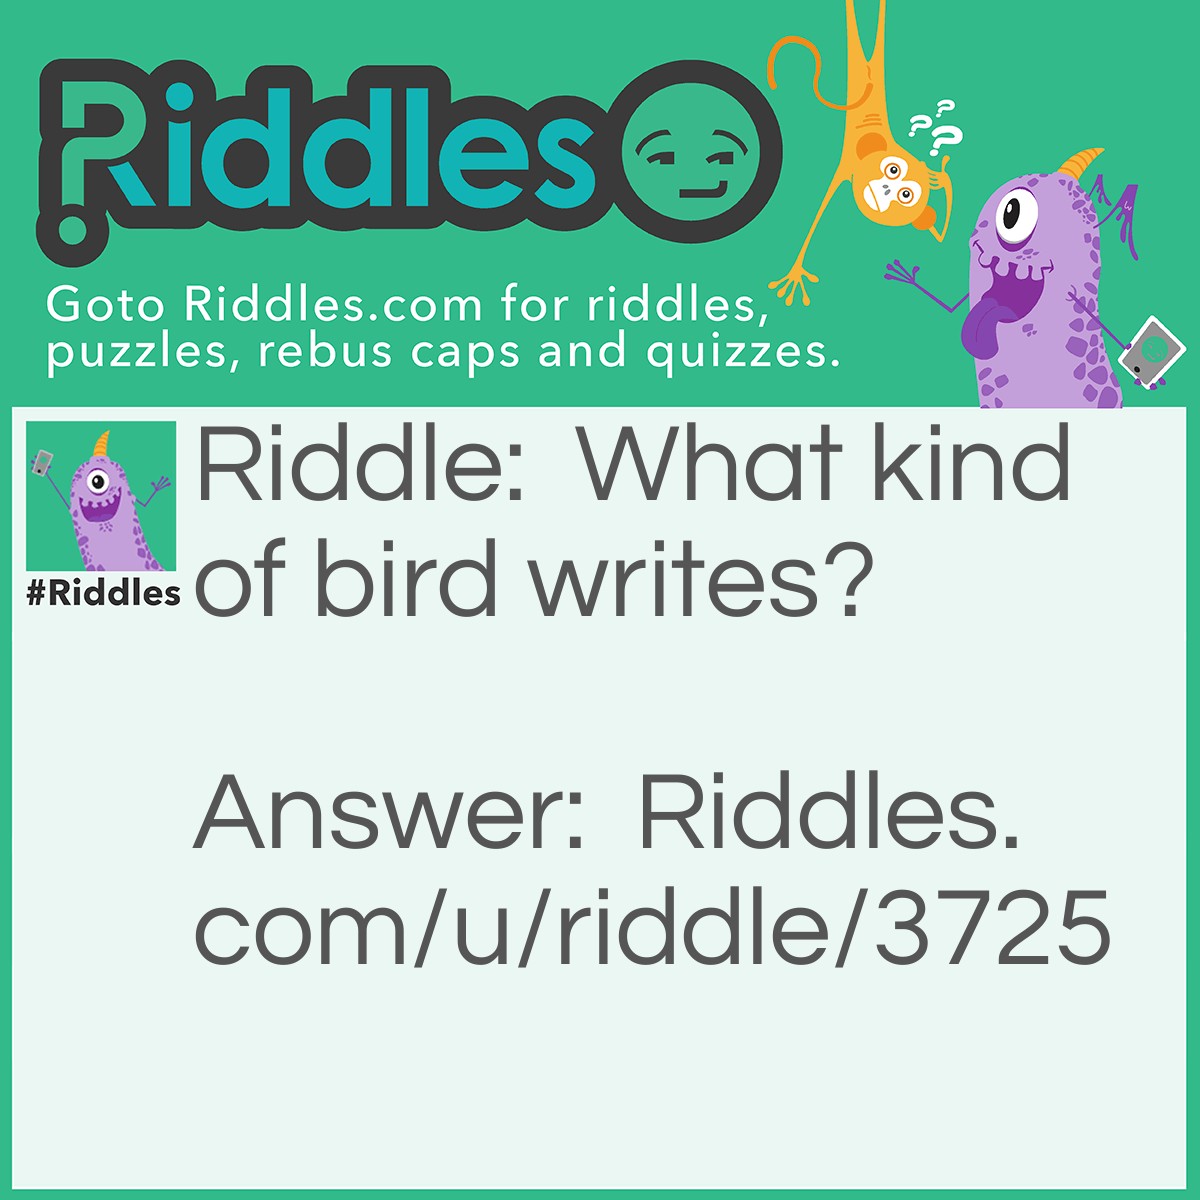 Riddle: What kind of bird writes? Answer: A pen-guin.